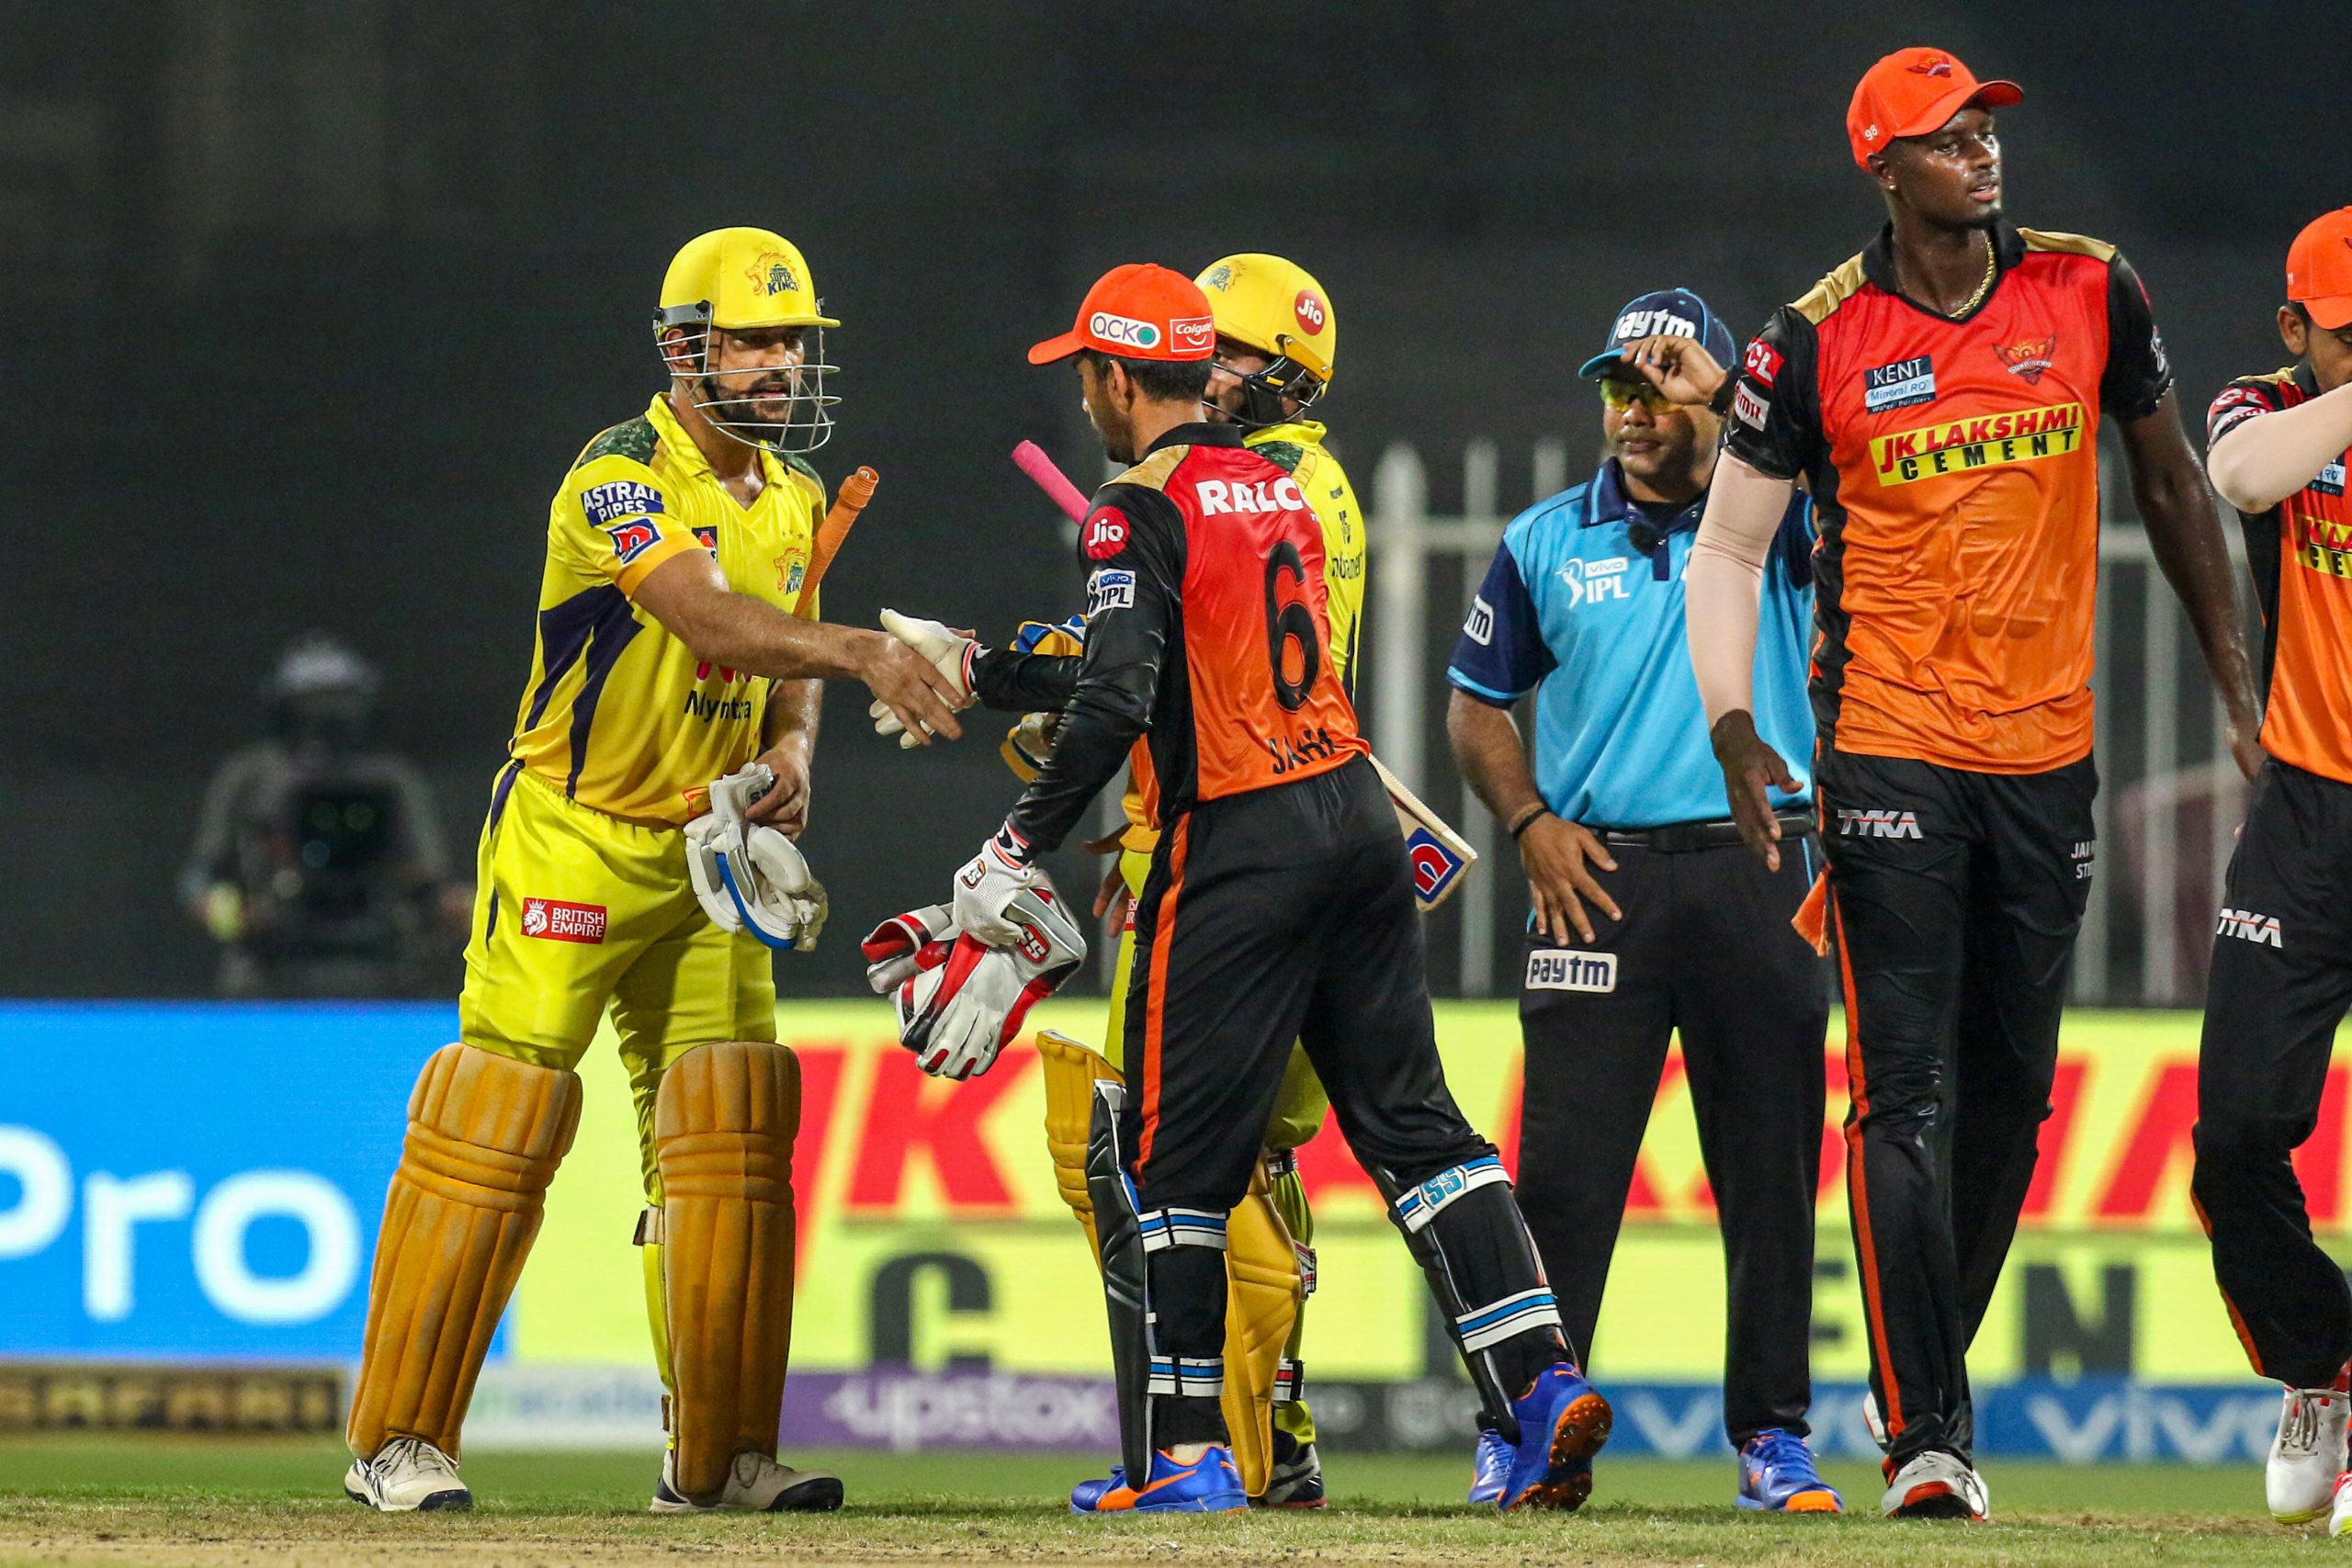 It means a lot, says Dhoni after CSK qualifies for IPL play-offs for 11th time